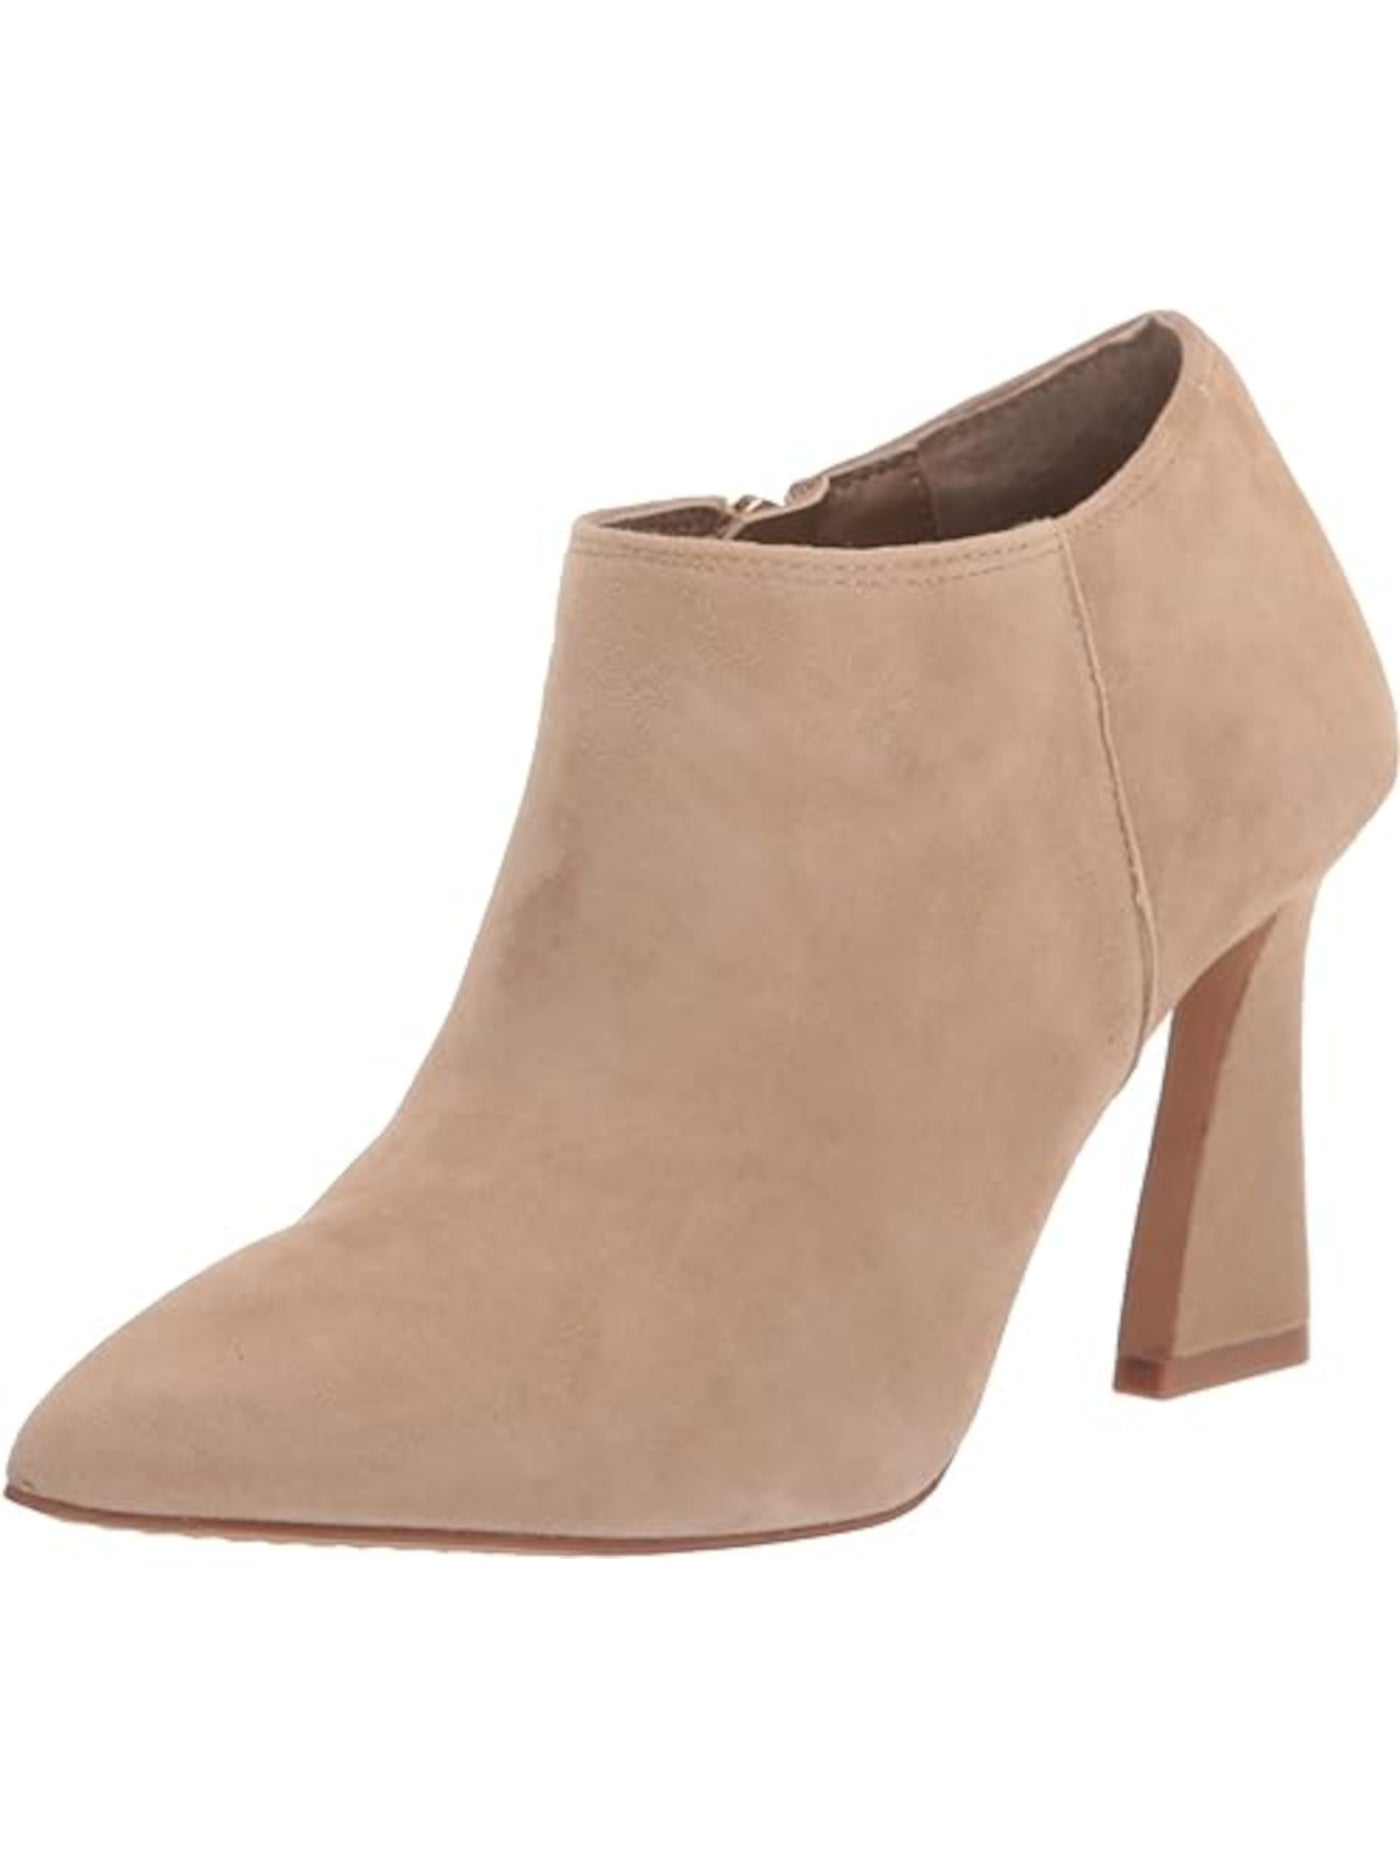 VINCE CAMUTO Womens Beige Padded Temindal Pointed Toe Sculpted Heel Zip-Up Leather Booties 5.5 M